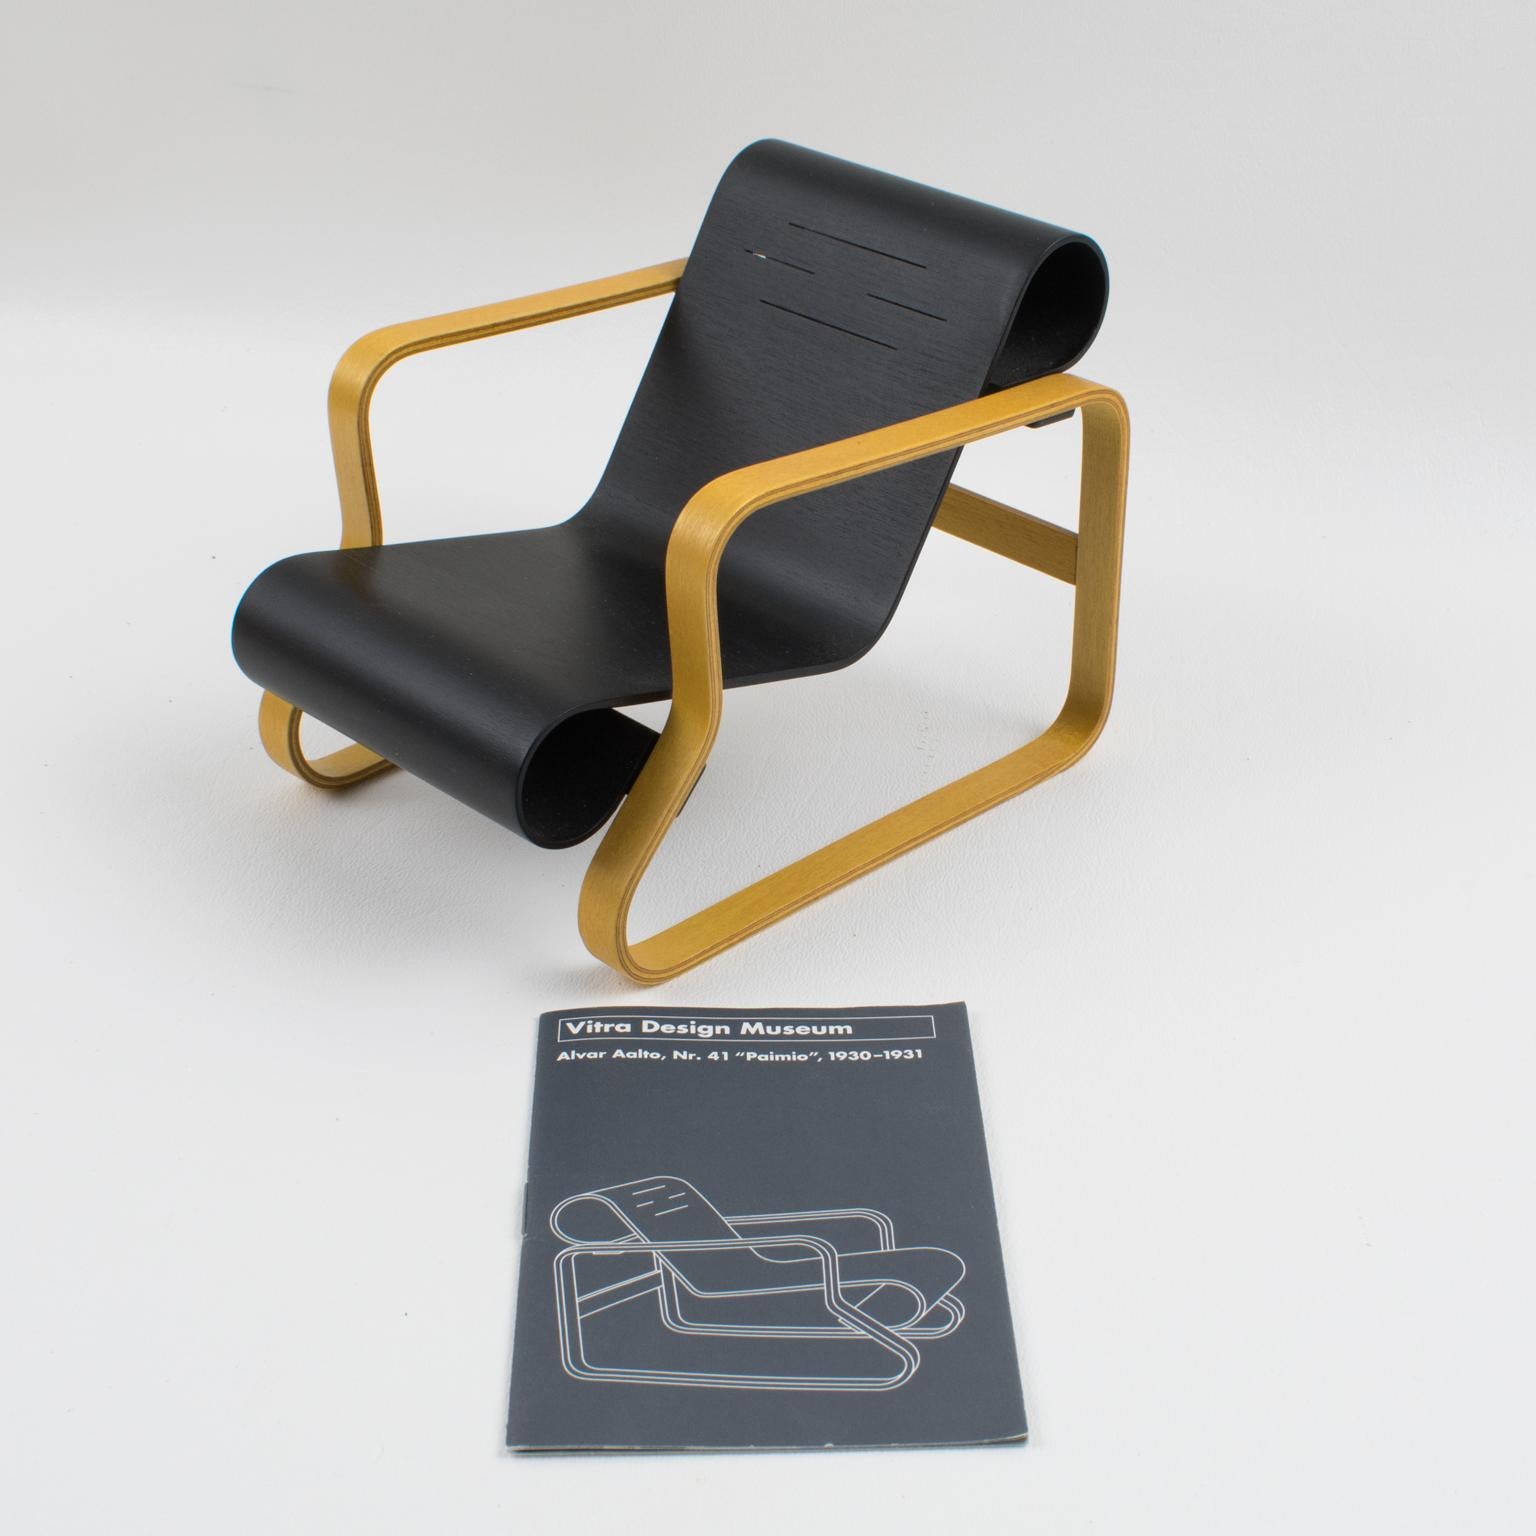 Iconic miniature Paimio chair designed by Alvar Aalto, circa 1930, and edited by Vitra. 
Alvar Aalto designed the Paimio chair in 1932-33, which revolutionized both the aesthetics and technology of modern furniture design. The arms are constructed